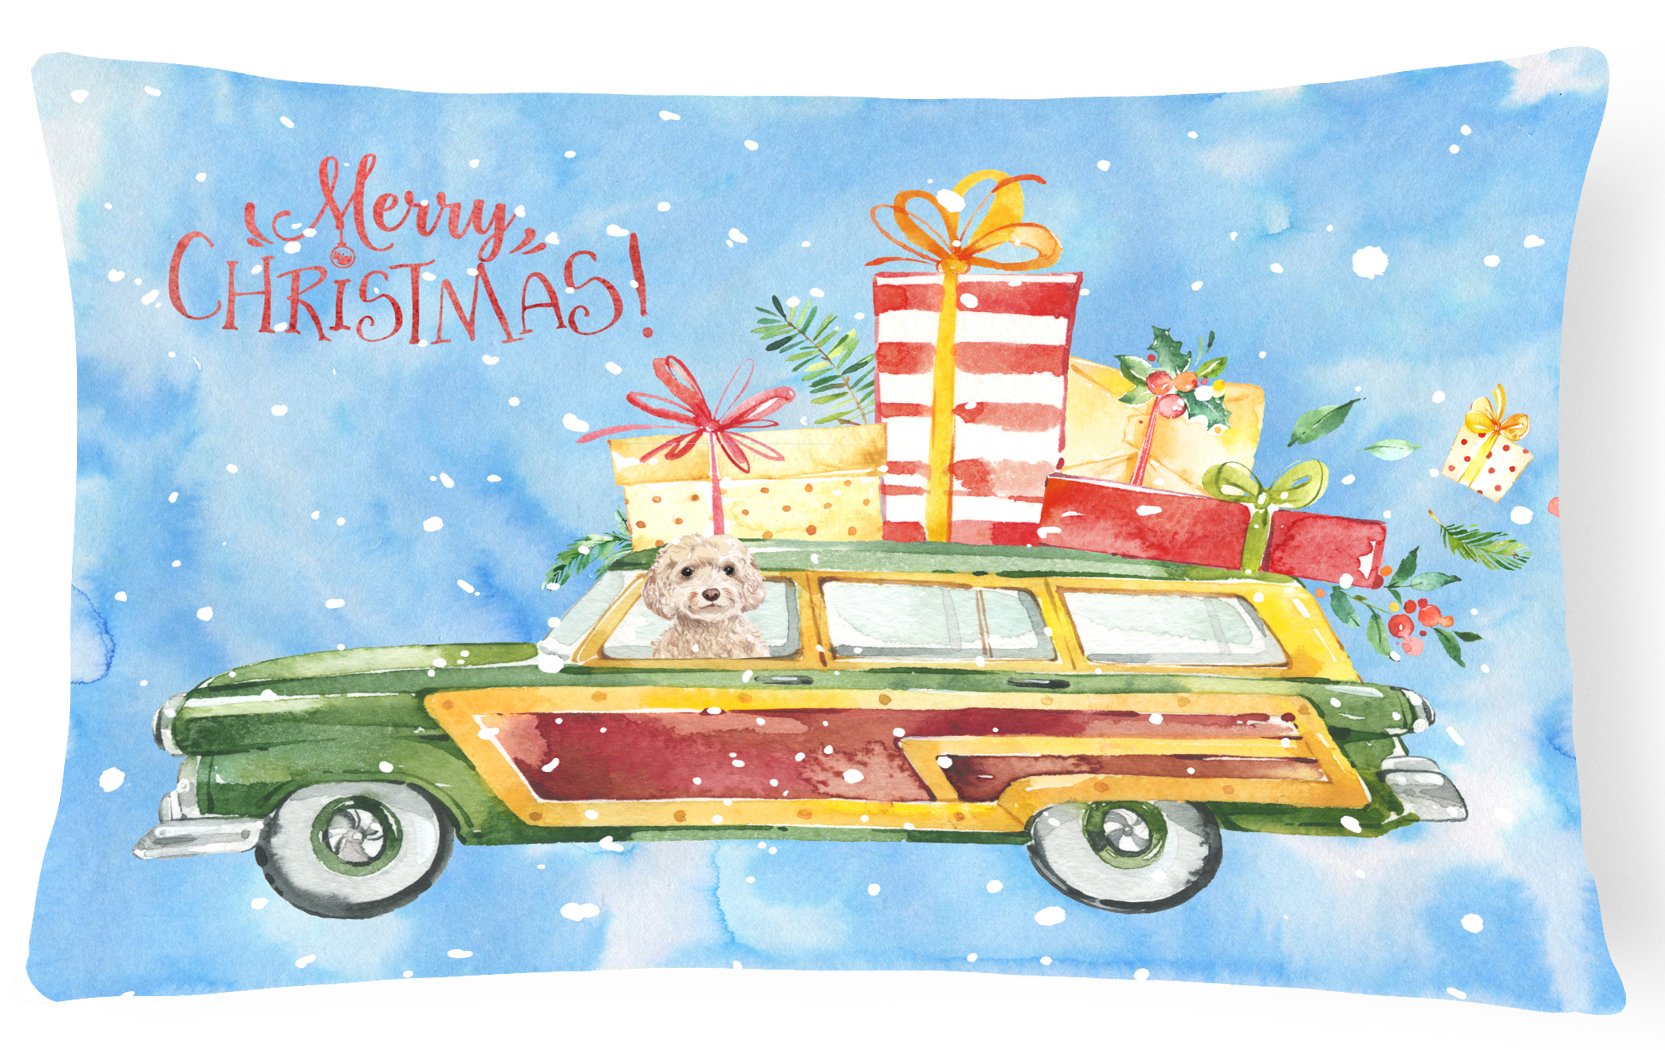 Merry Christmas Champagne Cockapoo Canvas Fabric Decorative Pillow CK2448PW1216 by Caroline's Treasures